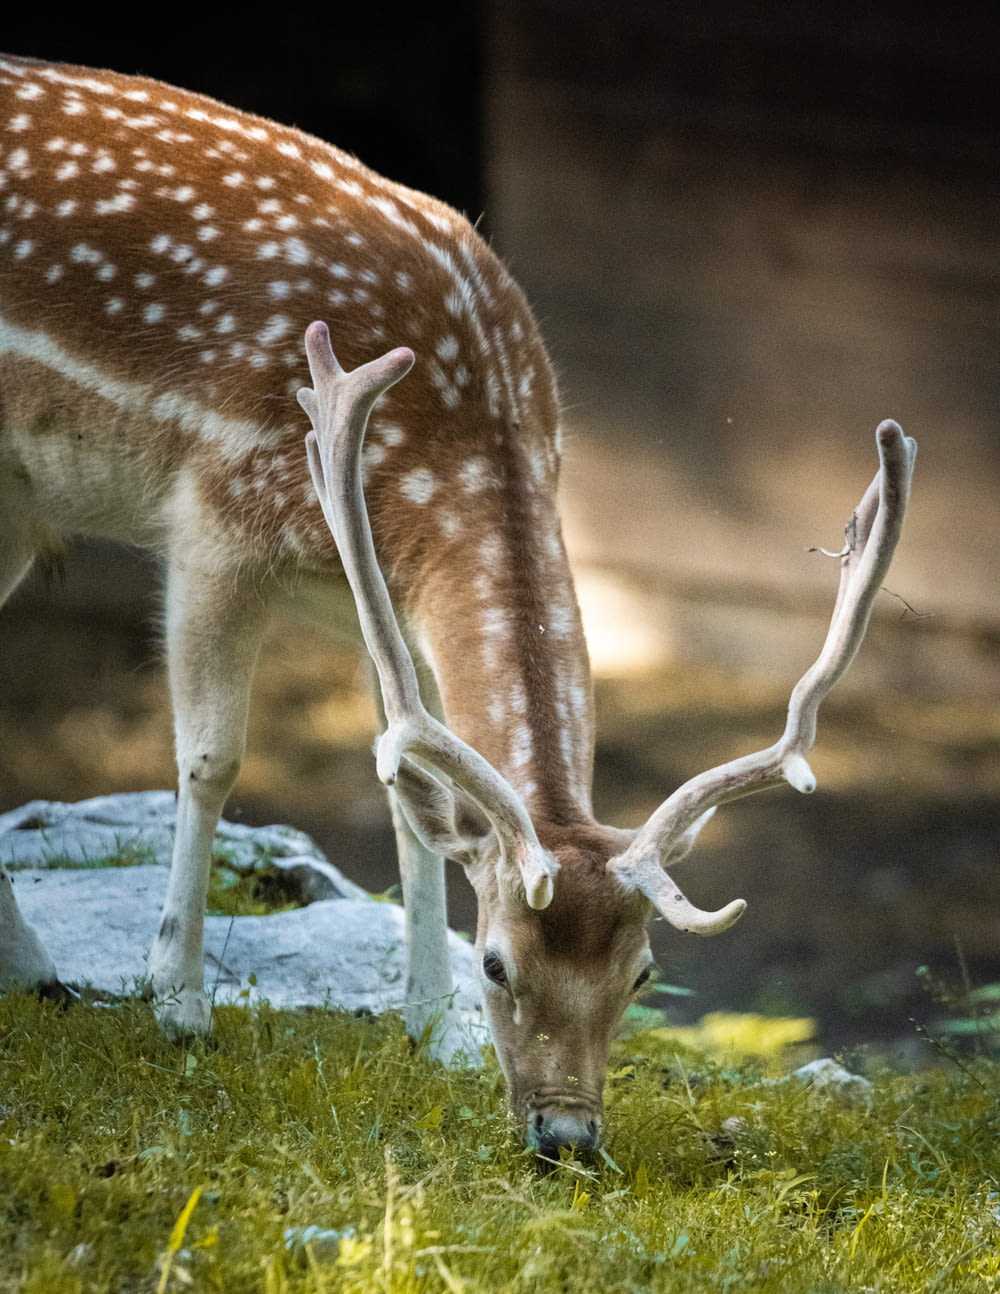 a deer grazing on grass in a zoo enclosure